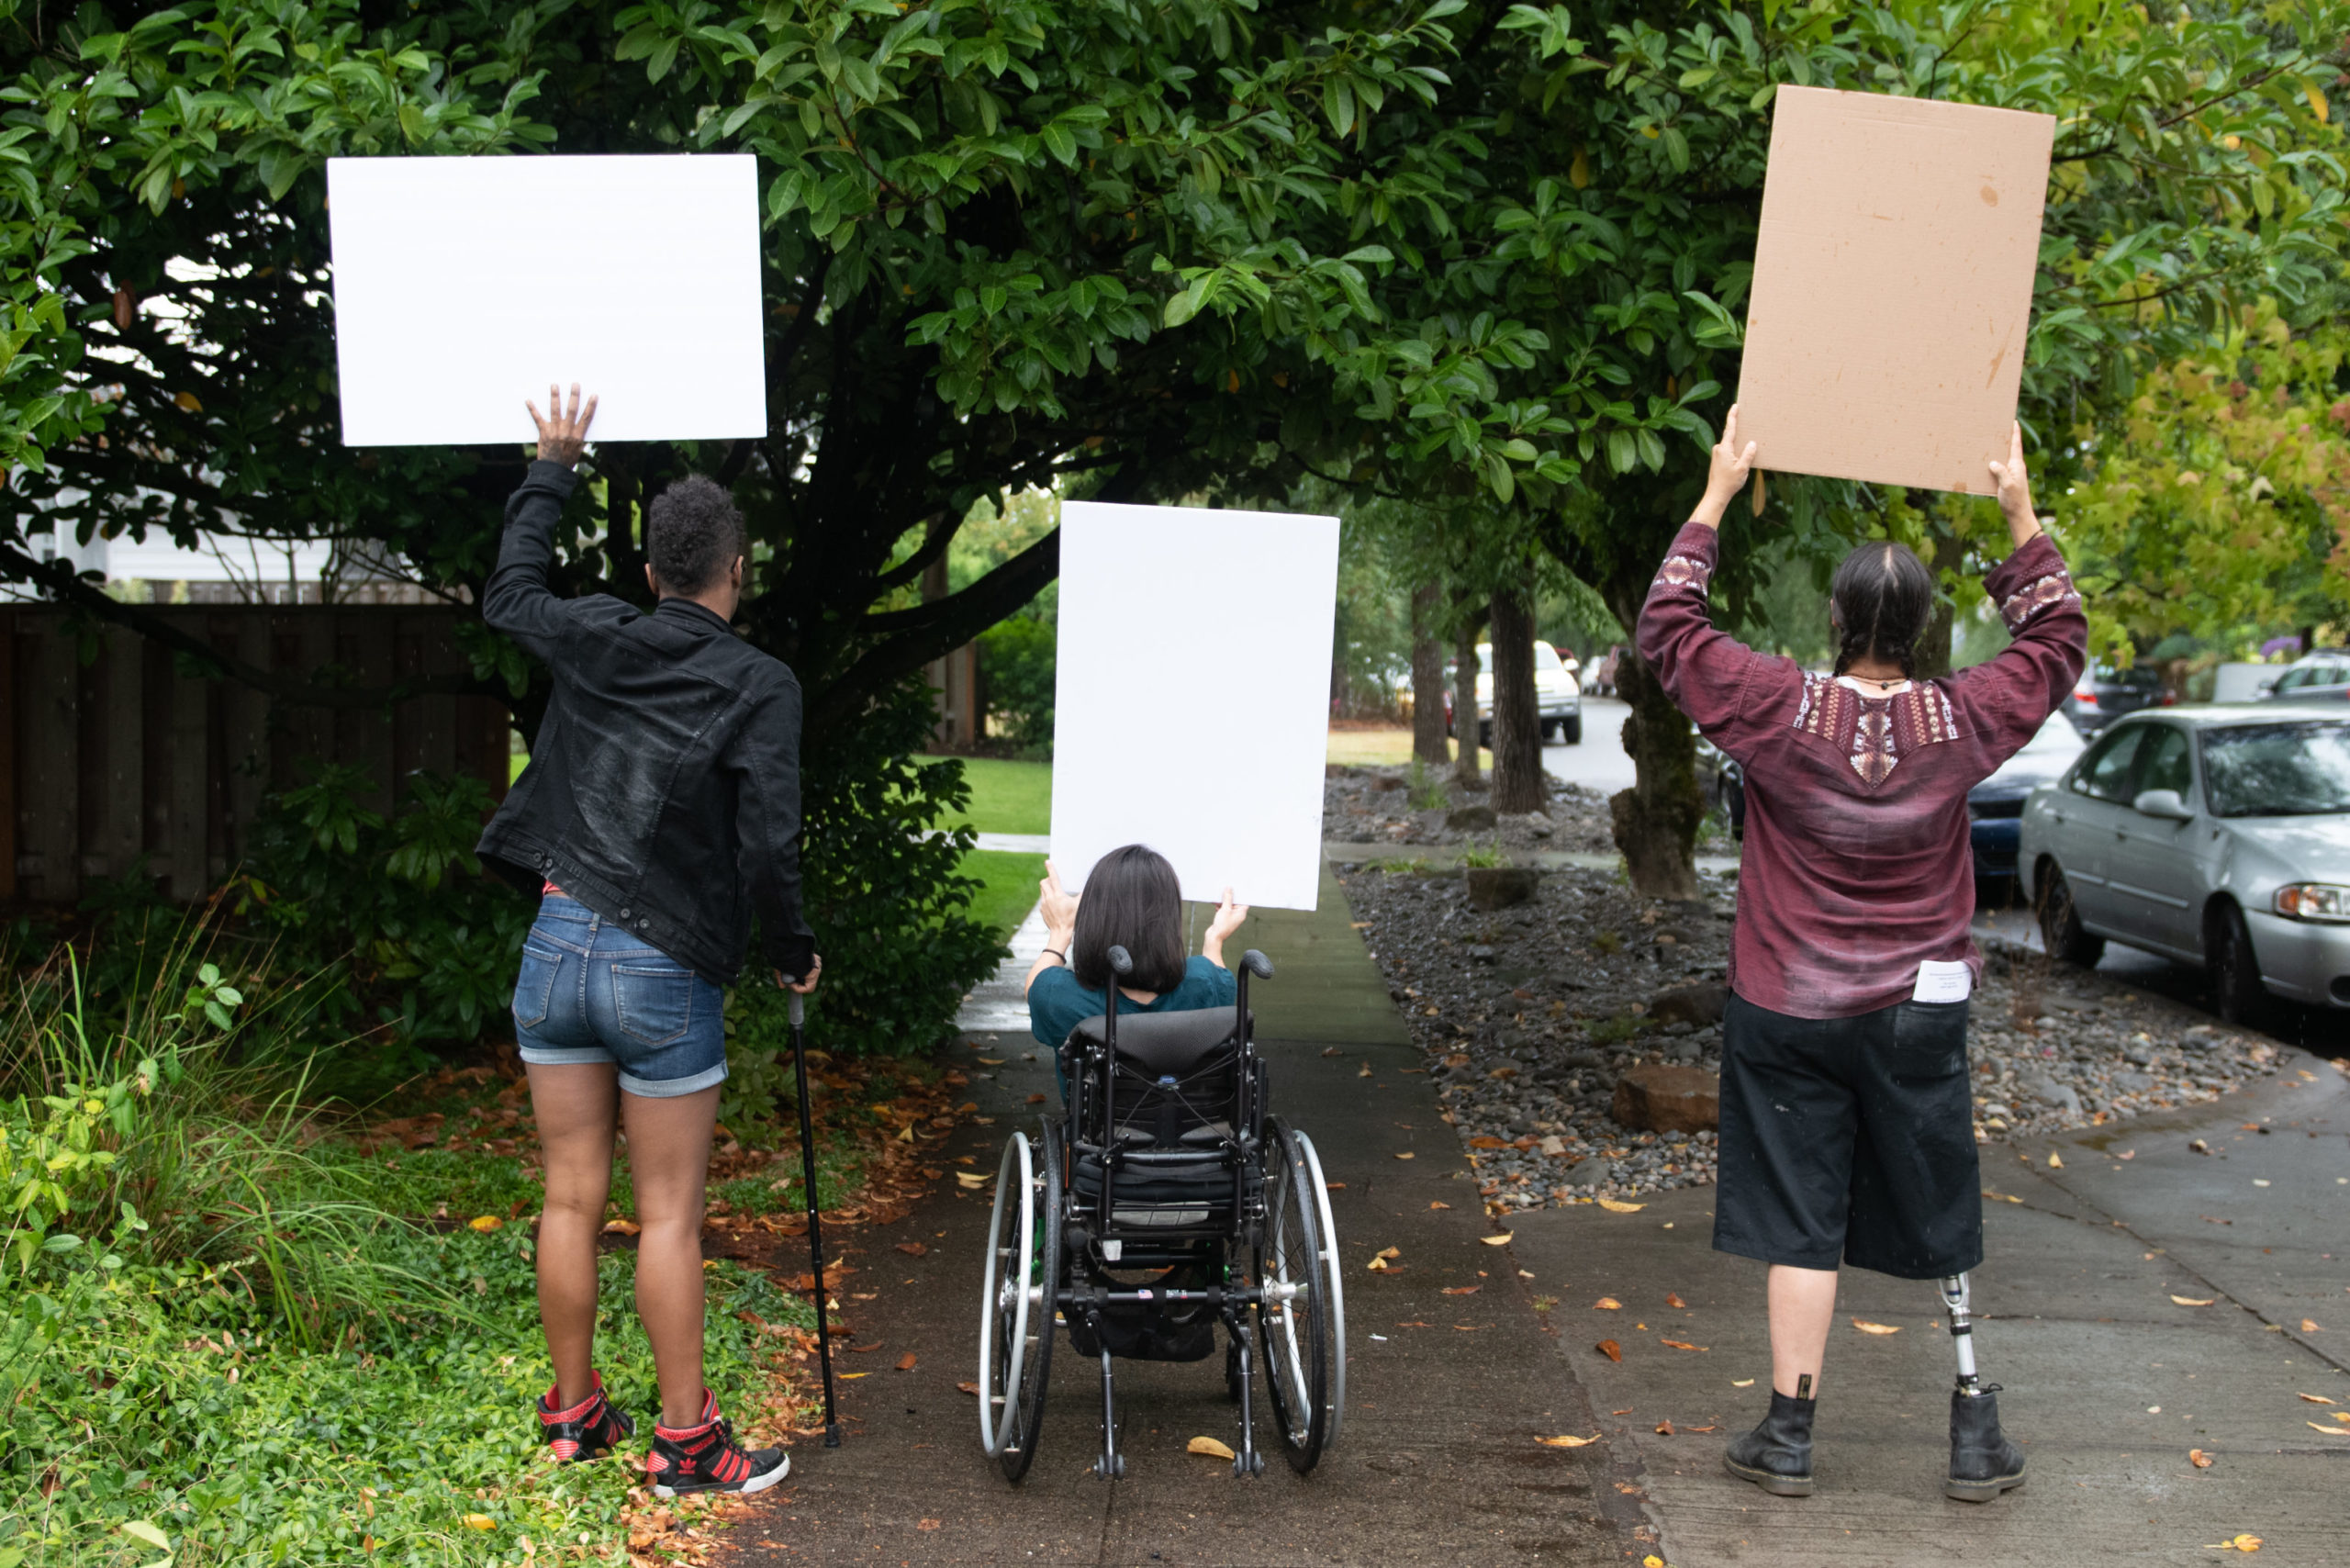 Three disabled people of color (a Black non-binary person with a cane, a South Asian person in a wheelchair, and an Indigenous Two-Spirit person with a prosthetic leg) block a neighborhood street while holding up cardboard signs. The photo is shot from behind everyone.